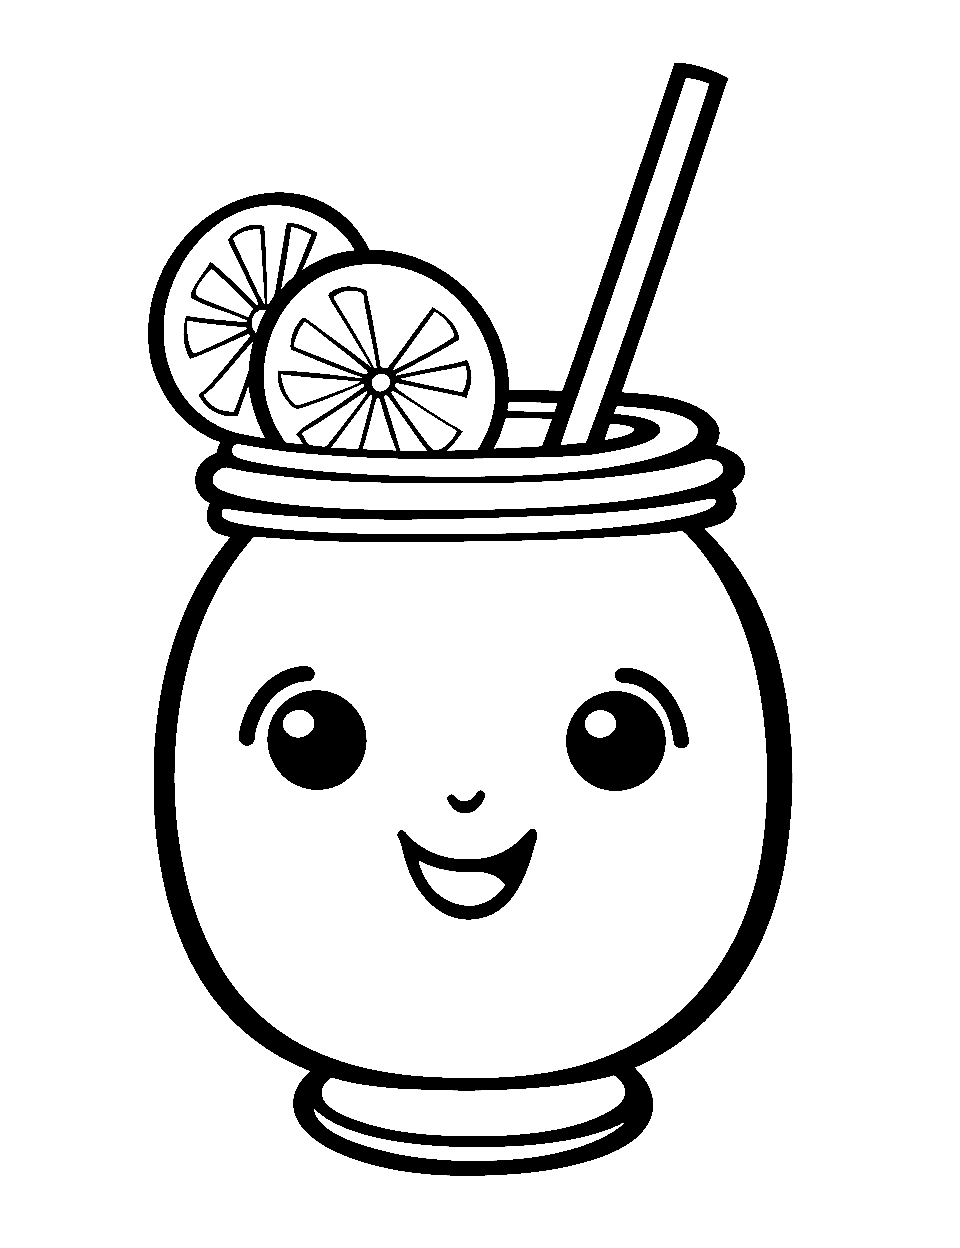 Easy-Peasy Lemon Squeezy Coloring Page - A cheerful lemonade with a straw, ready to be sipped.